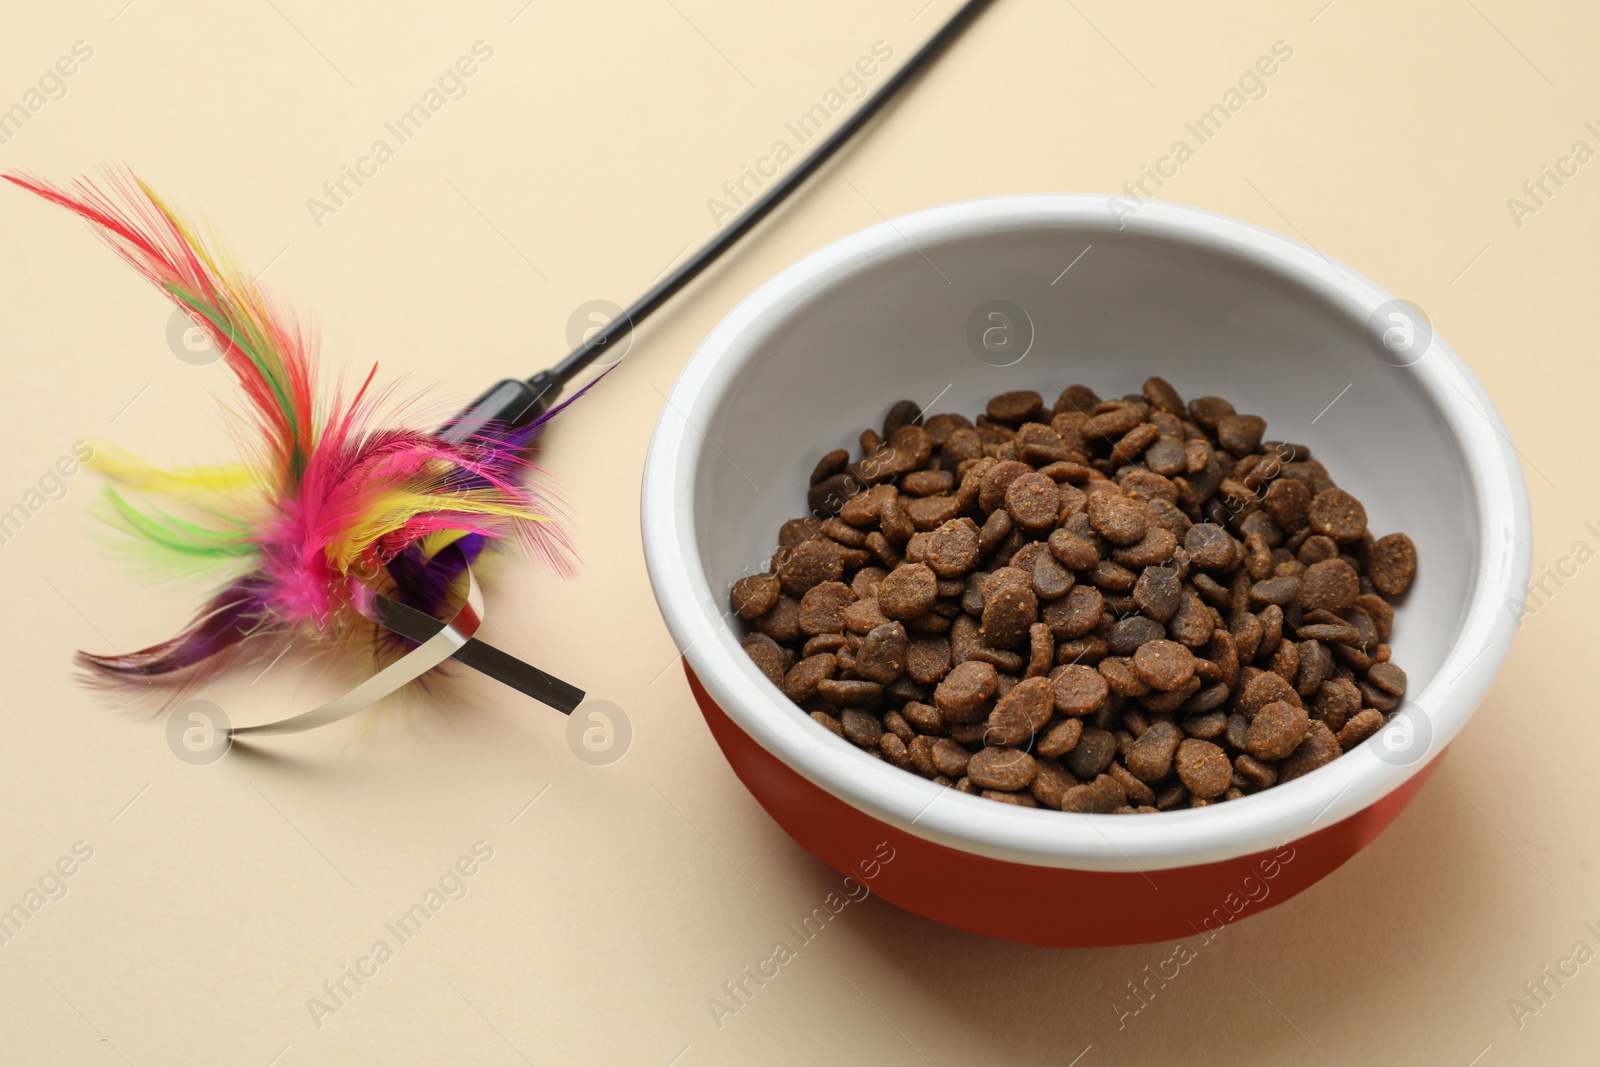 Photo of Dry cat food in bowl and pet toy on beige background